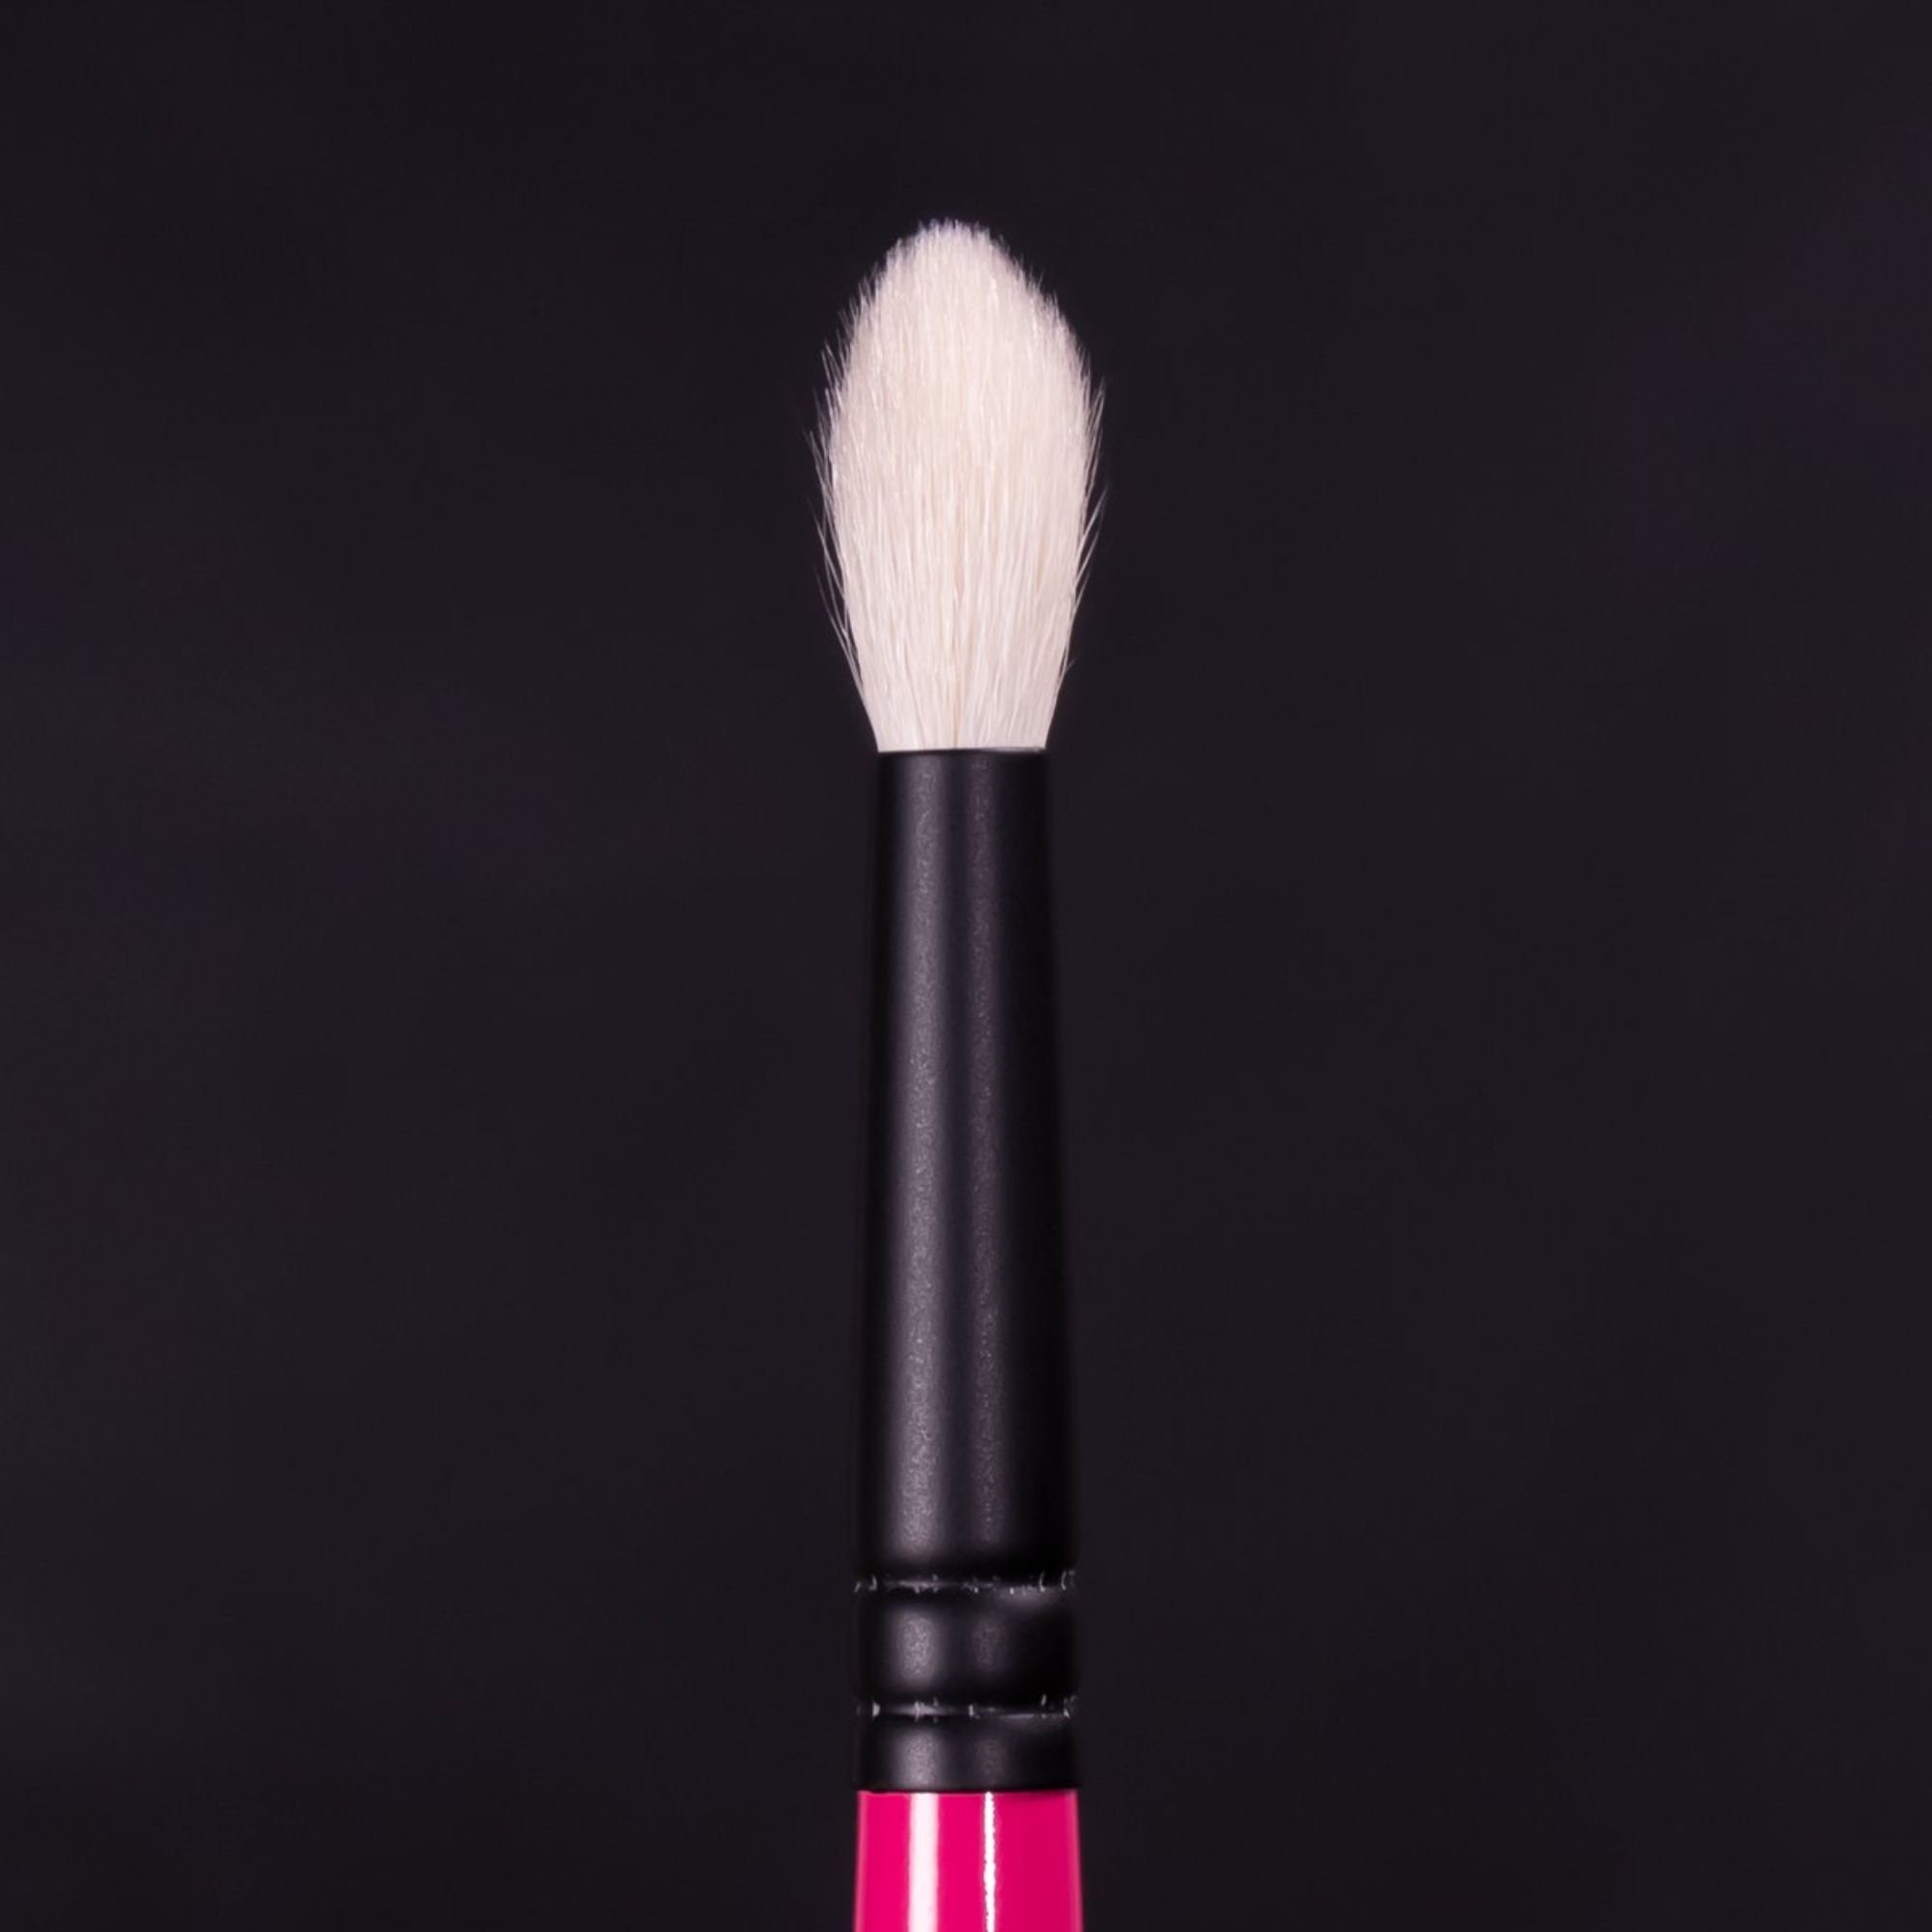 Whats Up Beauty - R103 Blending Eyeshadow Brush For Eye Shadow Makeup Cruelty Free